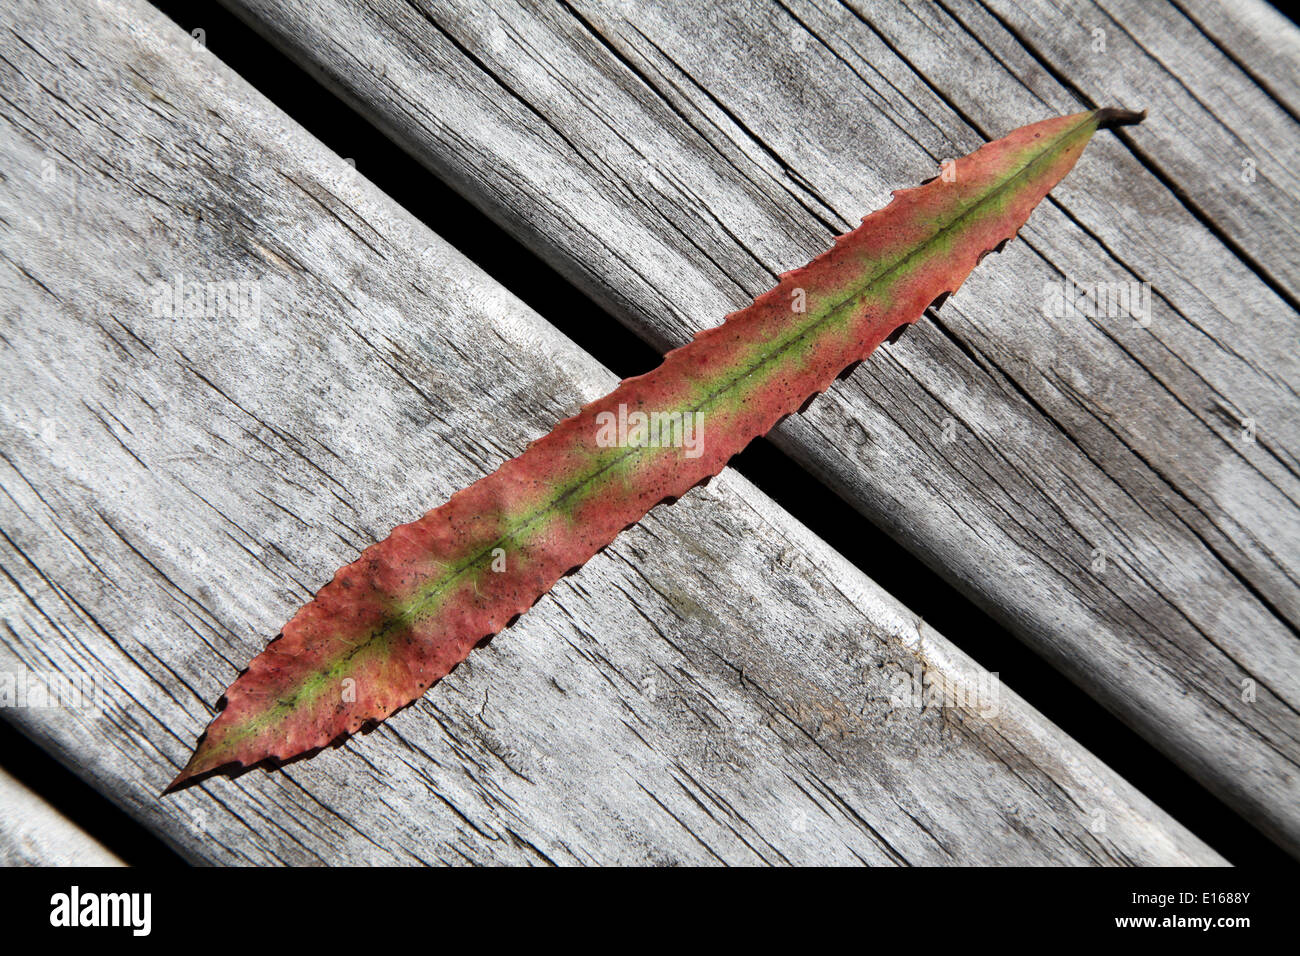 A narrow spear-shaped New Zealand brown orange leaf with  a green striped centre on a distressed timber background Stock Photo